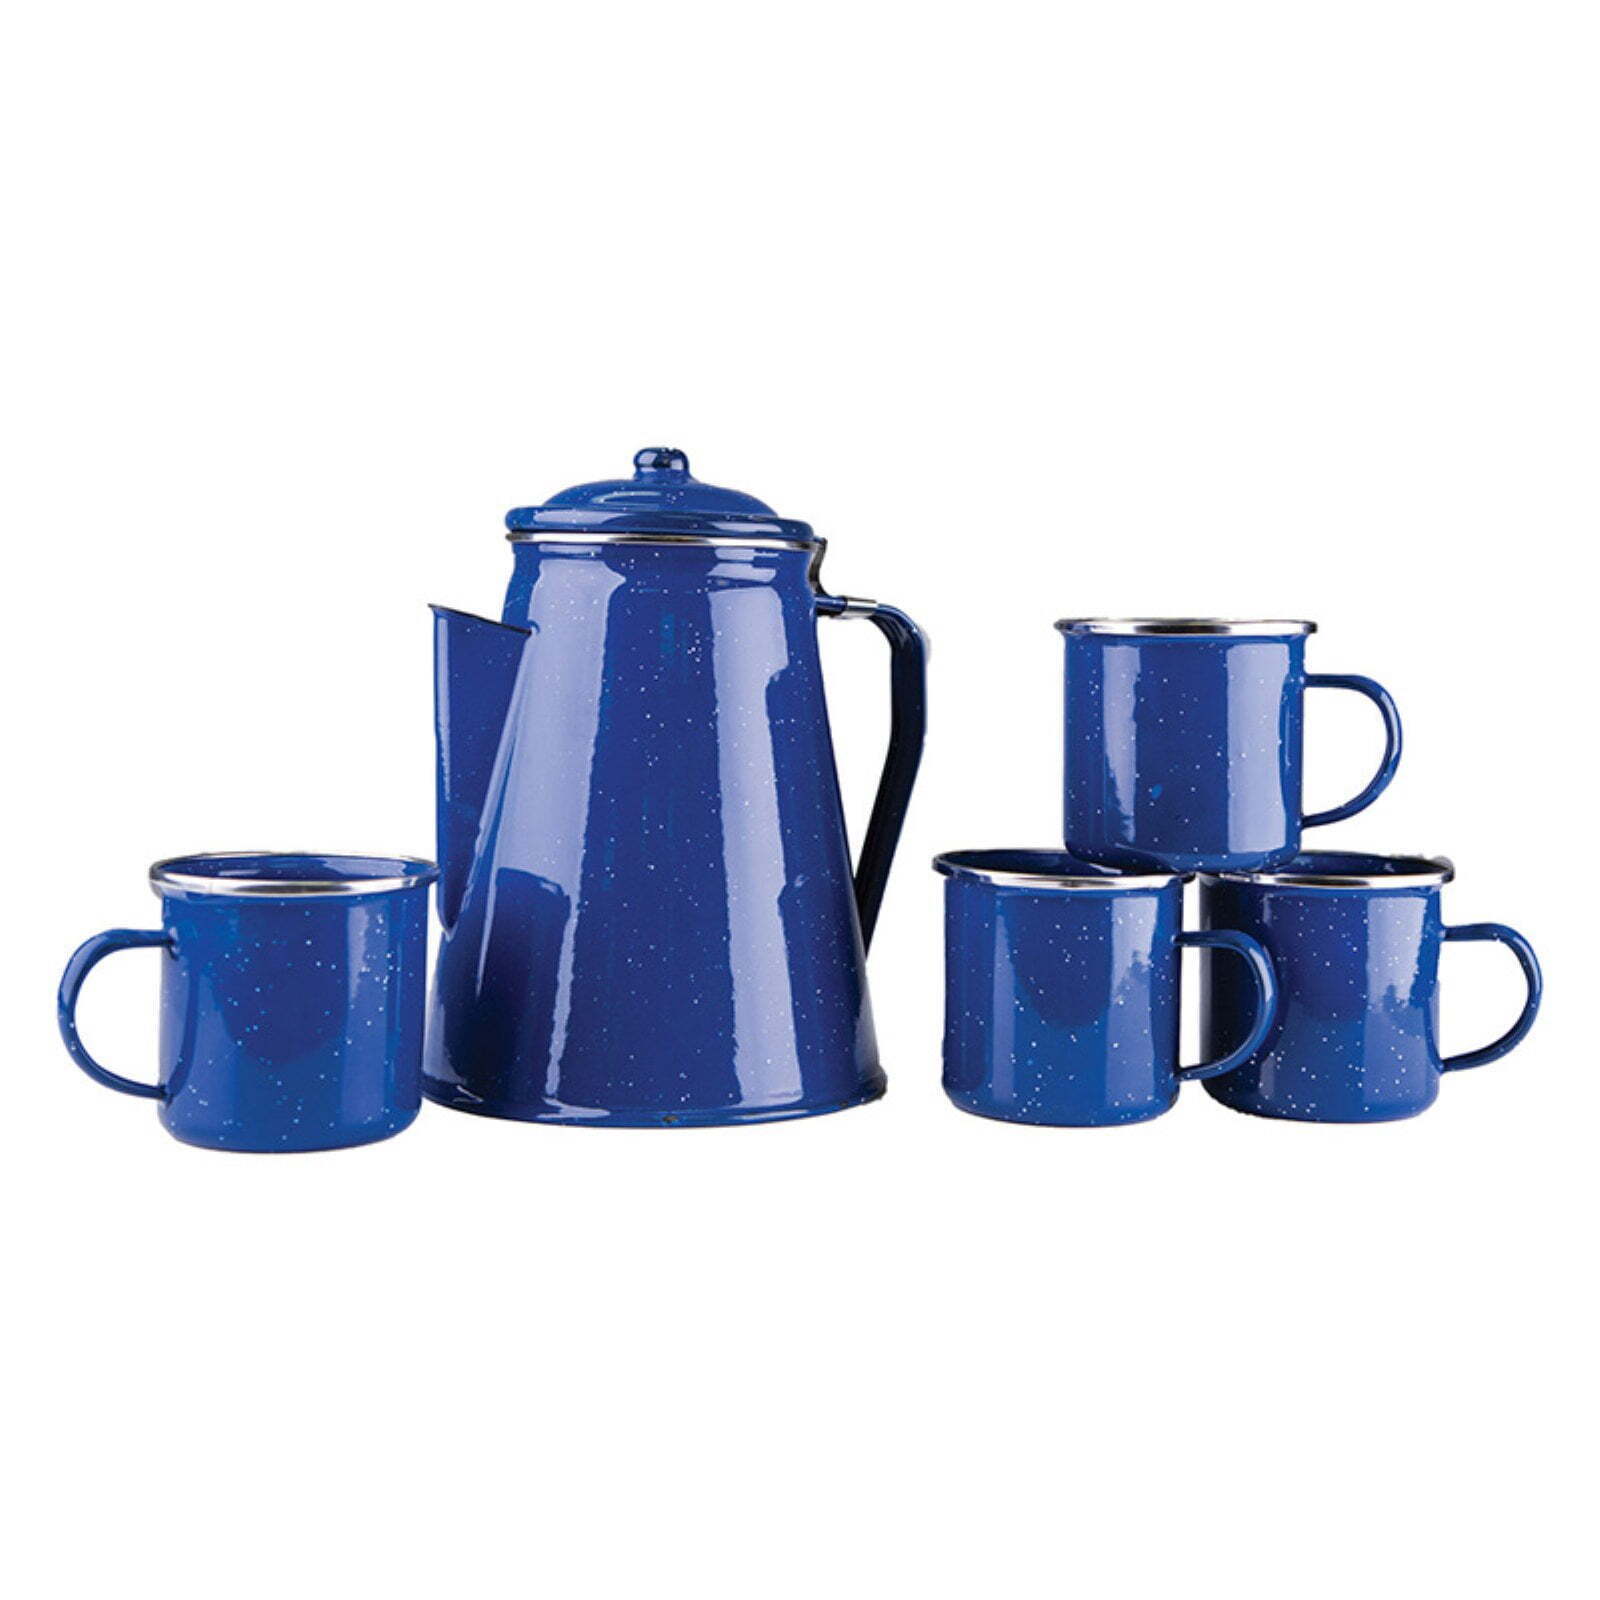 Enamel 8 Cup Coffee Pot with Percolator And 4 12 Ounce Mugs Blue